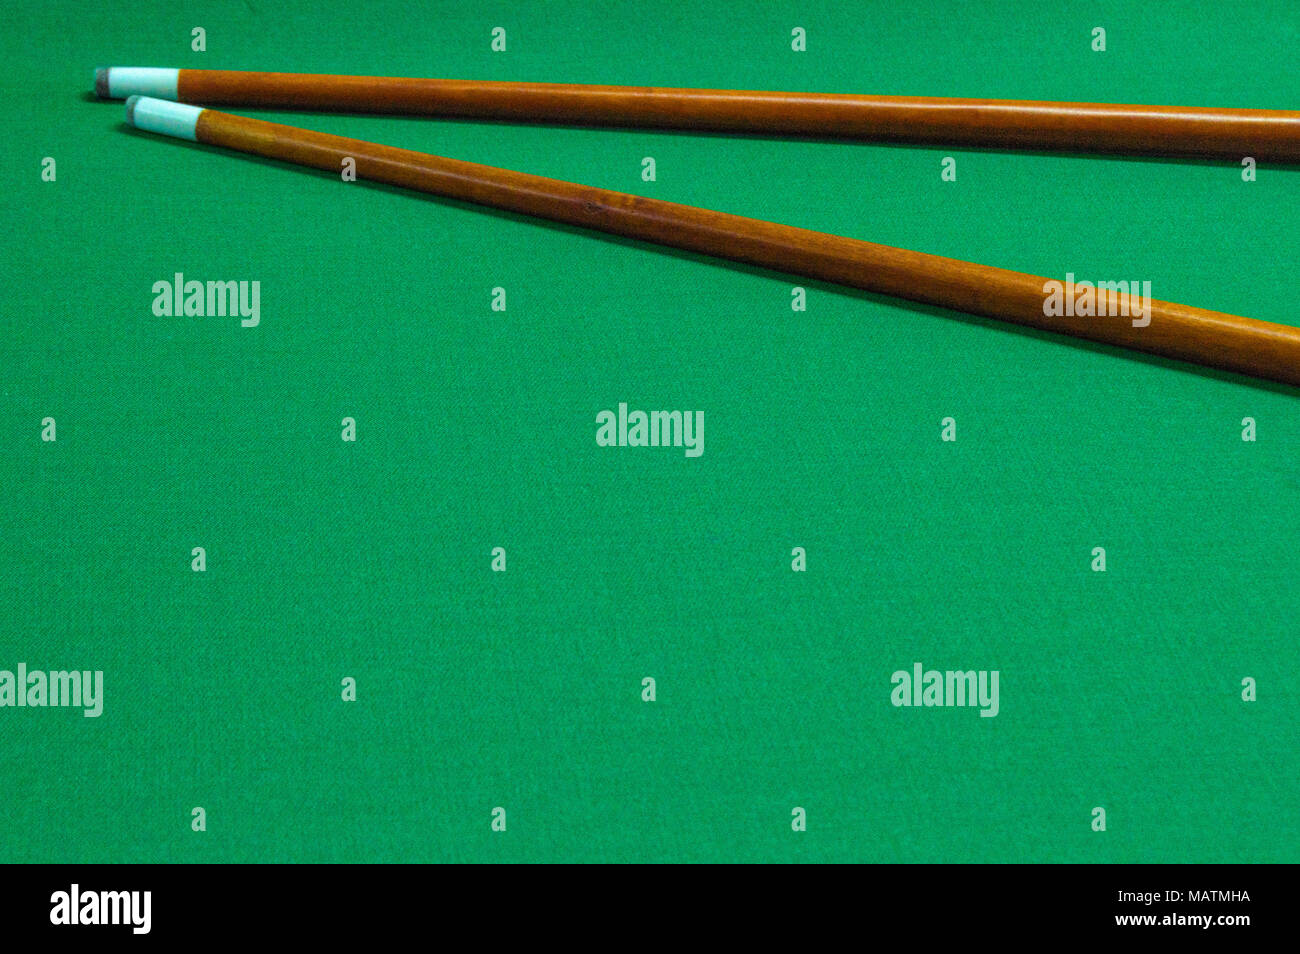 two pool cues on the green background of the pool table Stock Photo